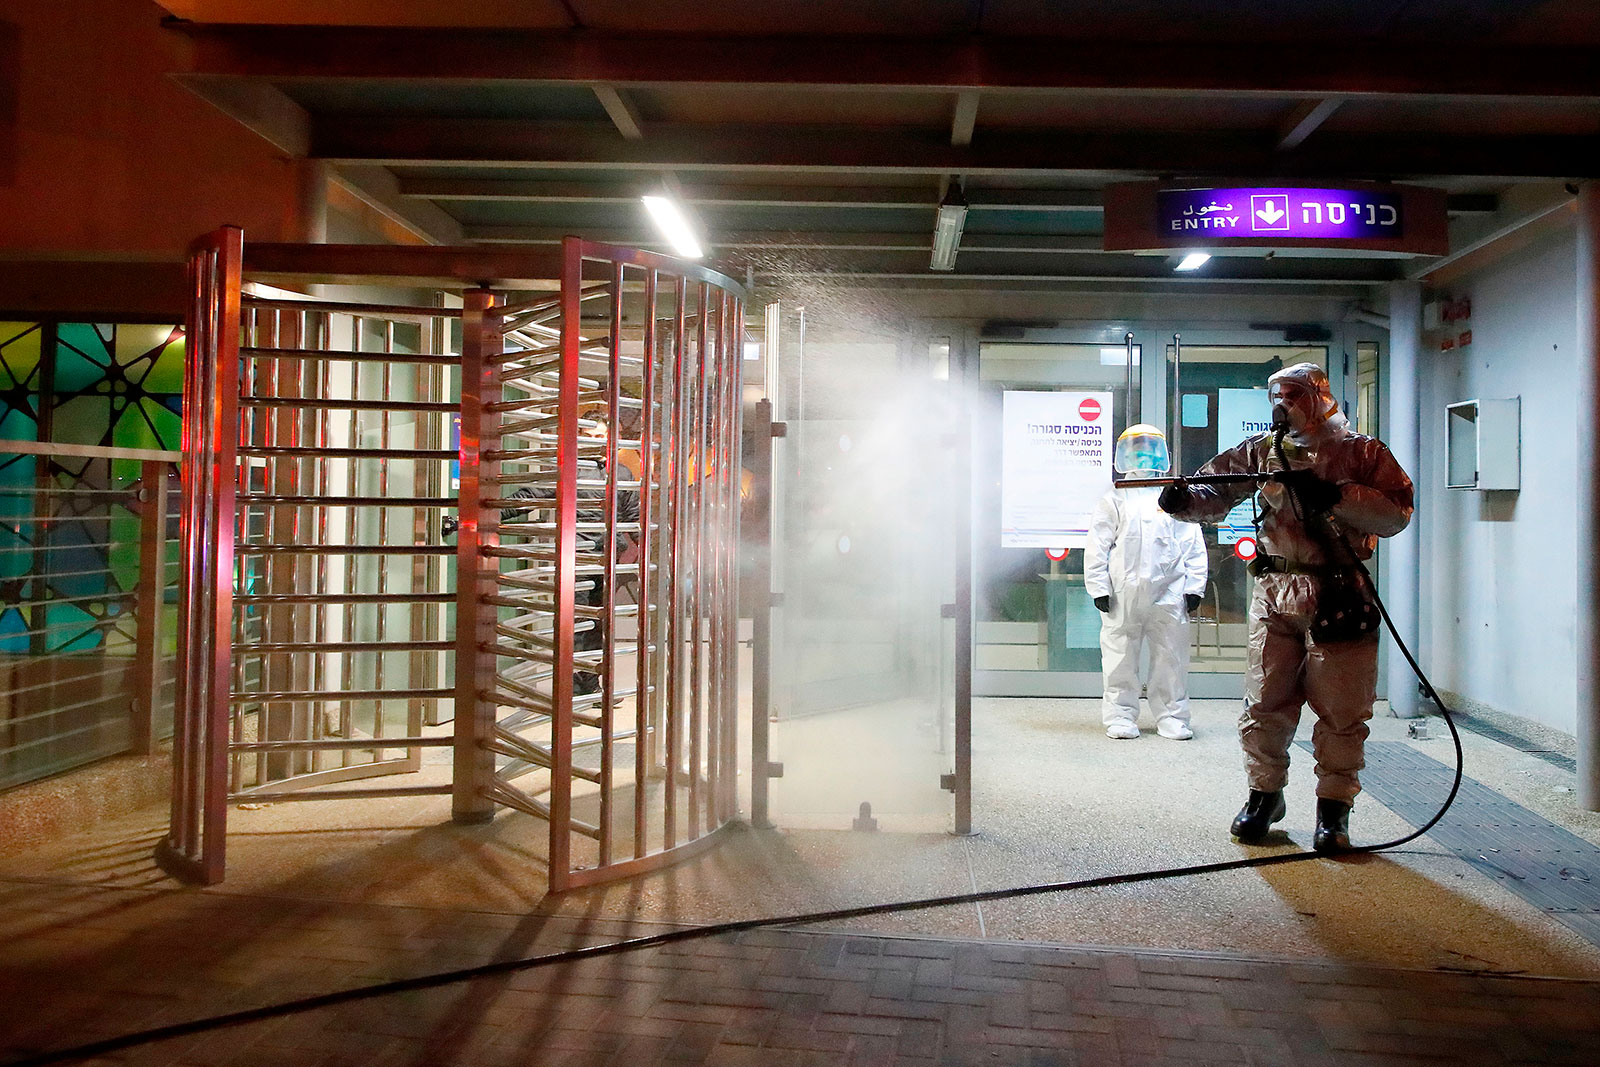 A firefighter sprays a turnstile with disinfectant at the Moshe Dayan Railway Station in Israel.